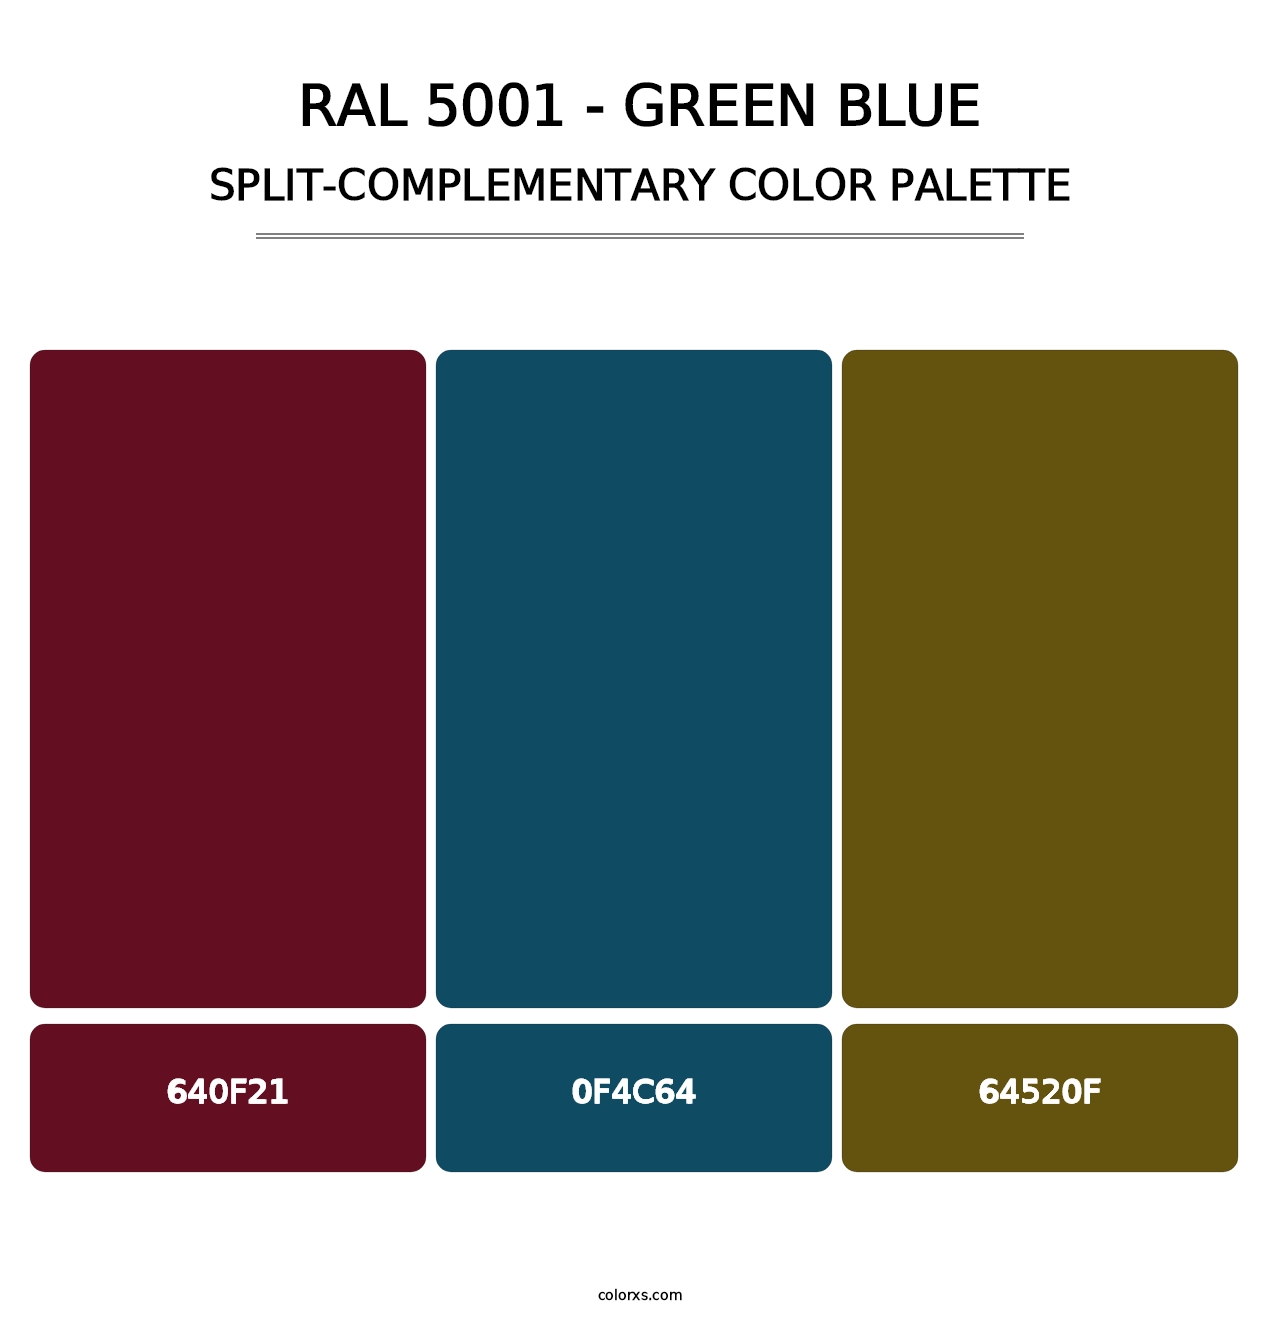 RAL 5001 - Green Blue - Split-Complementary Color Palette